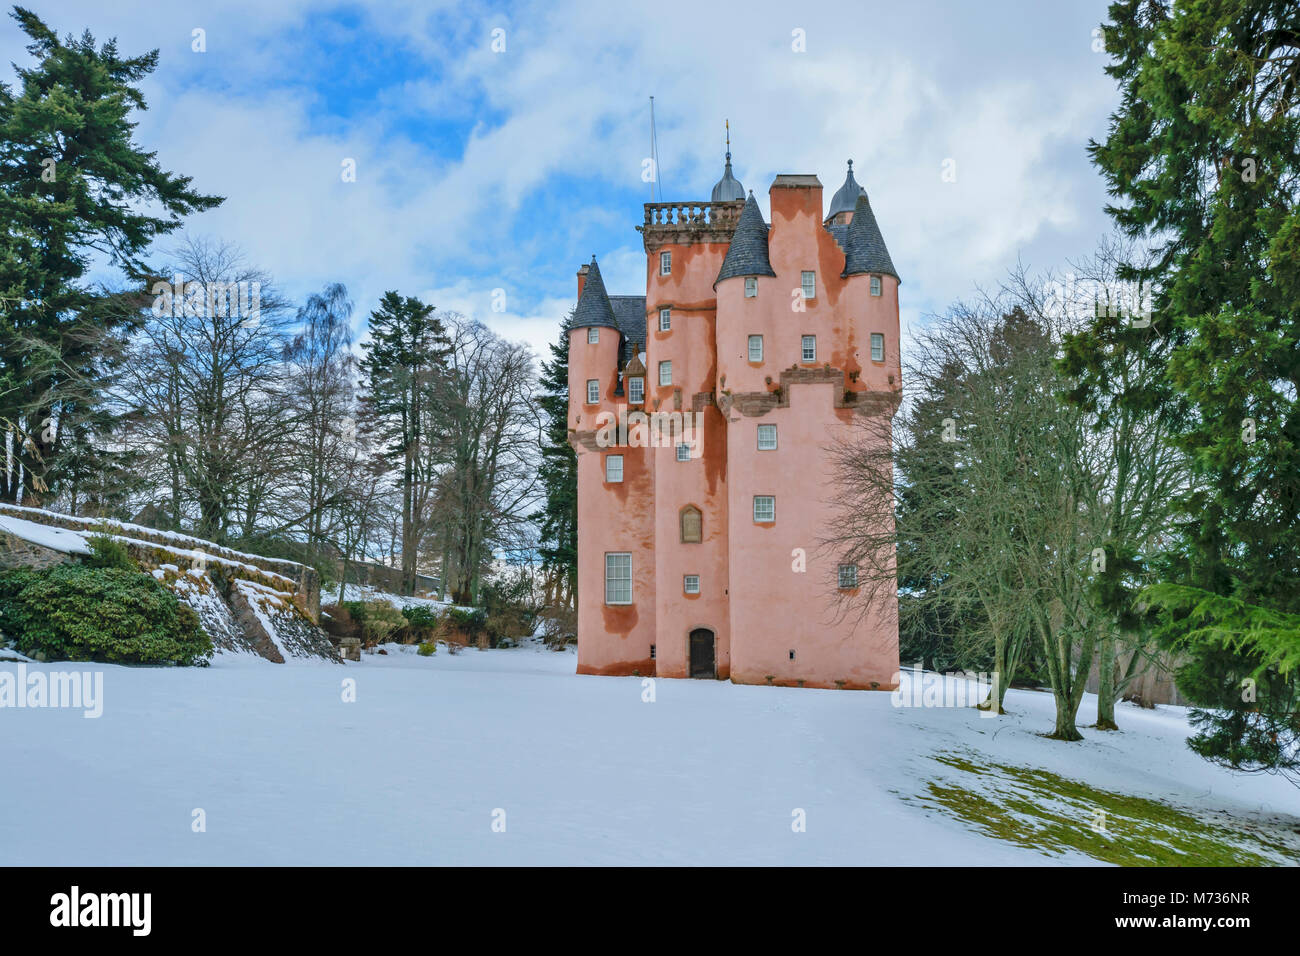 CRAIGIEVAR CASTLE ABERDEENSHIRE SCOTLAND SURROUNDED BY WINTER SNOW AND EVERGREEN PINE TREES Stock Photo